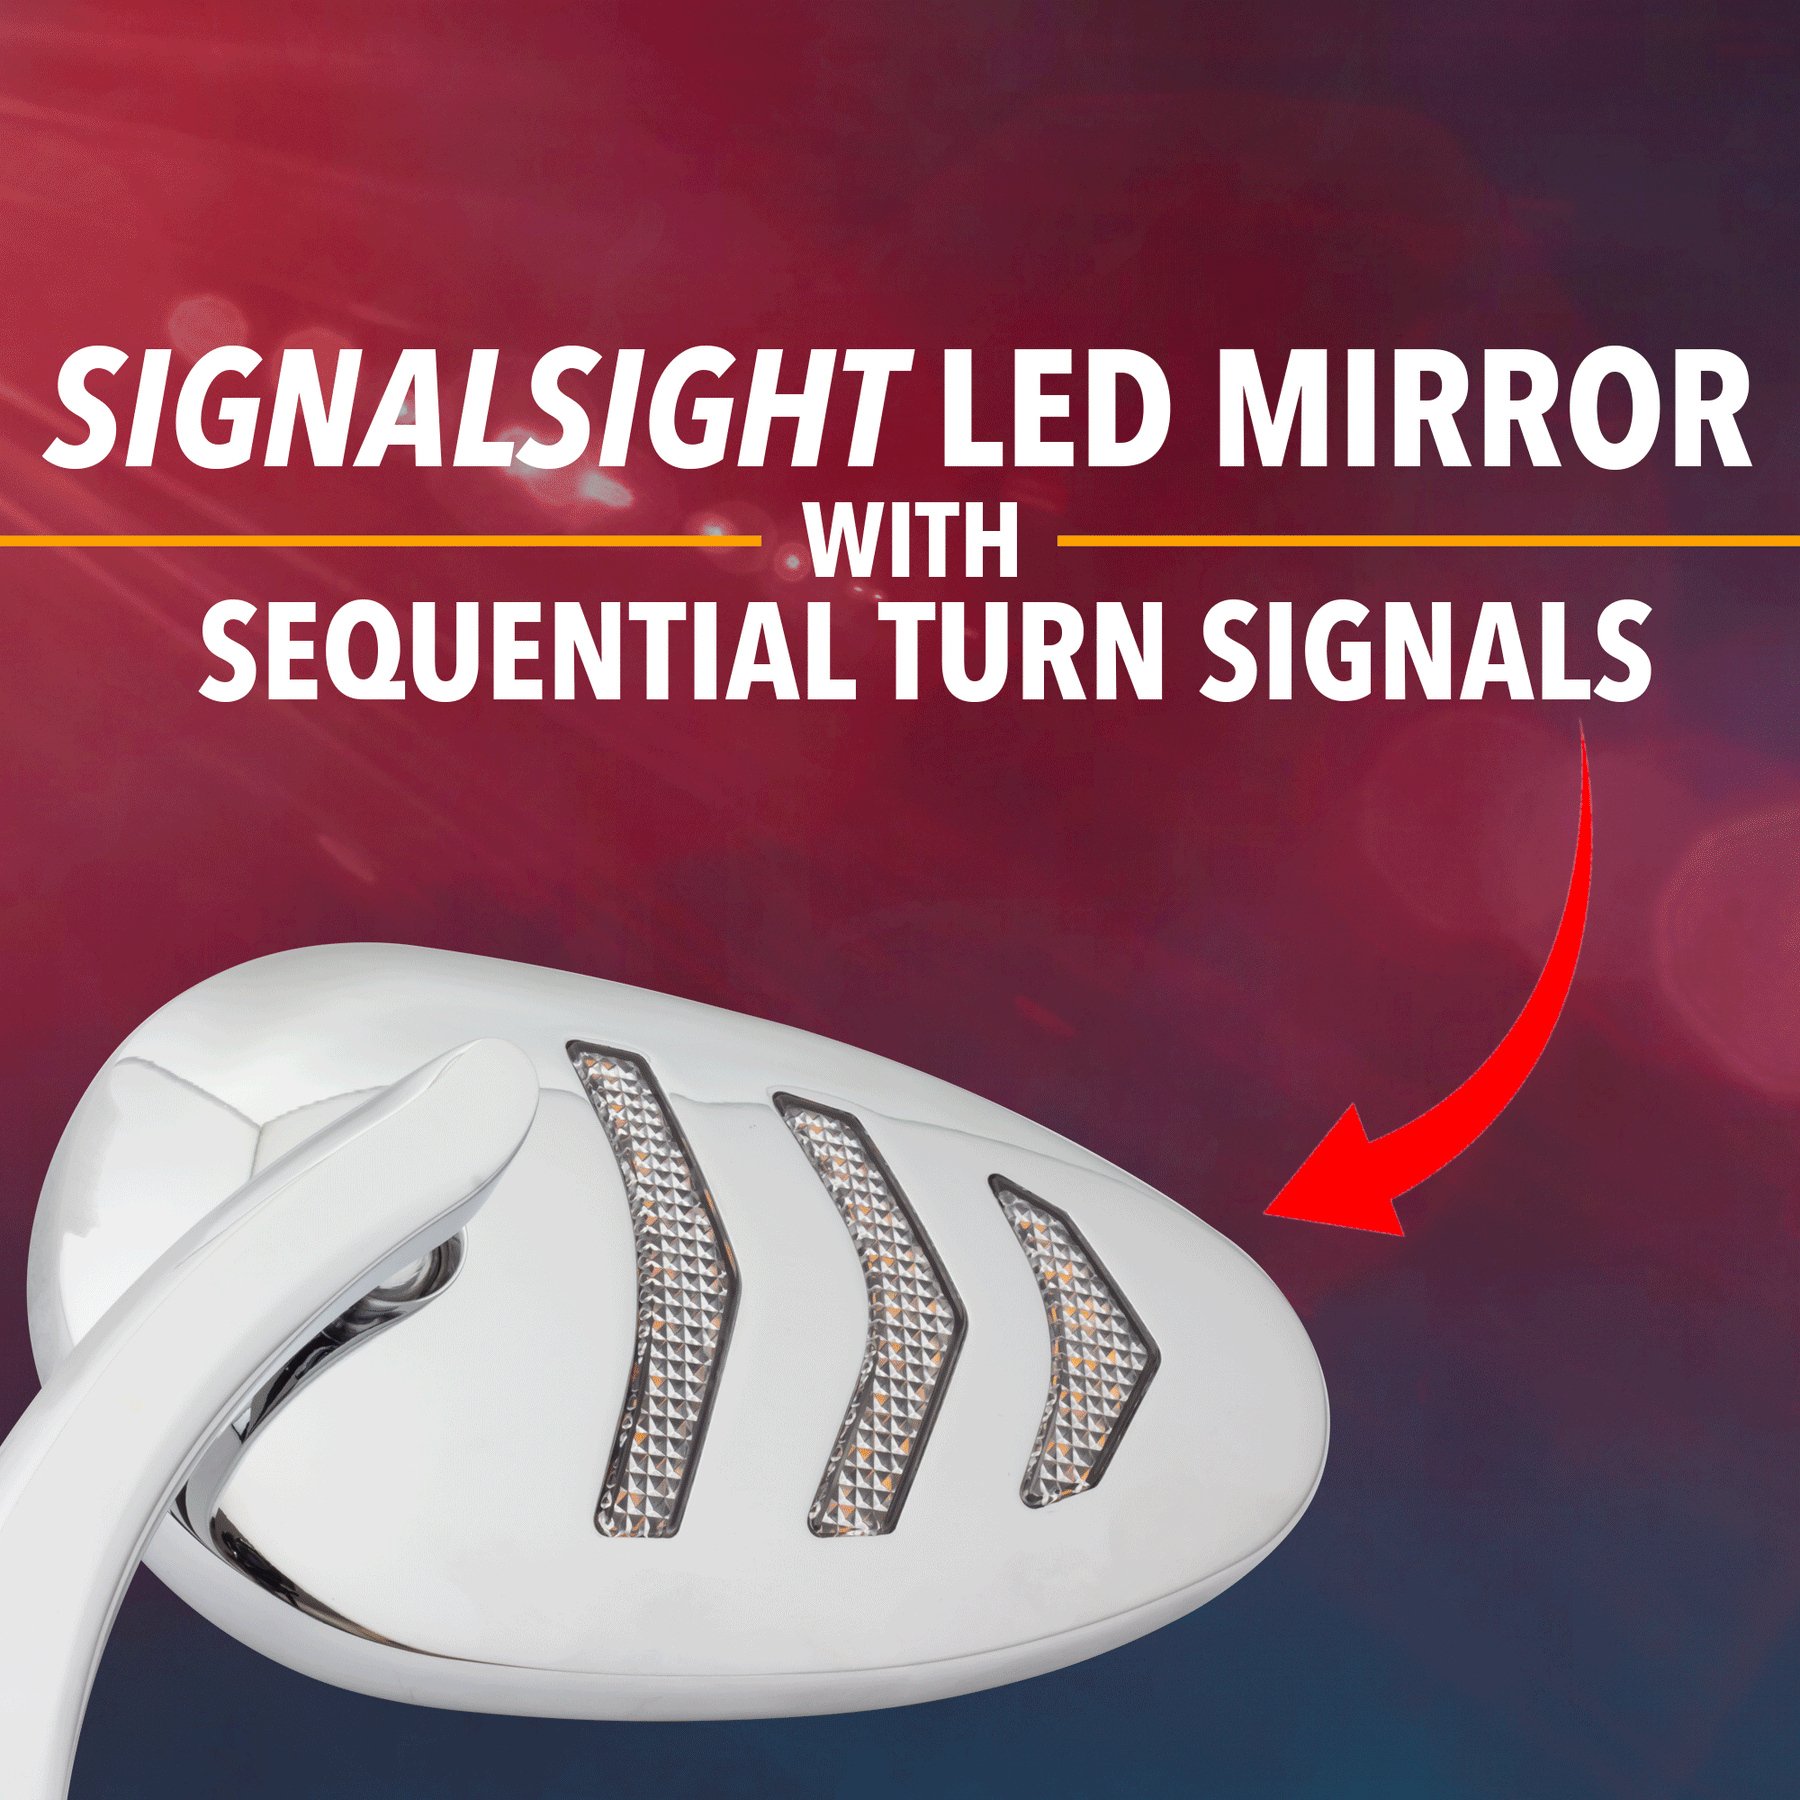 Eagle Lights SIGNALSIGHT LED Mirror with Sequential Turn Signals for Harley Davidson Softail, Dyna and Touring Models - Pair